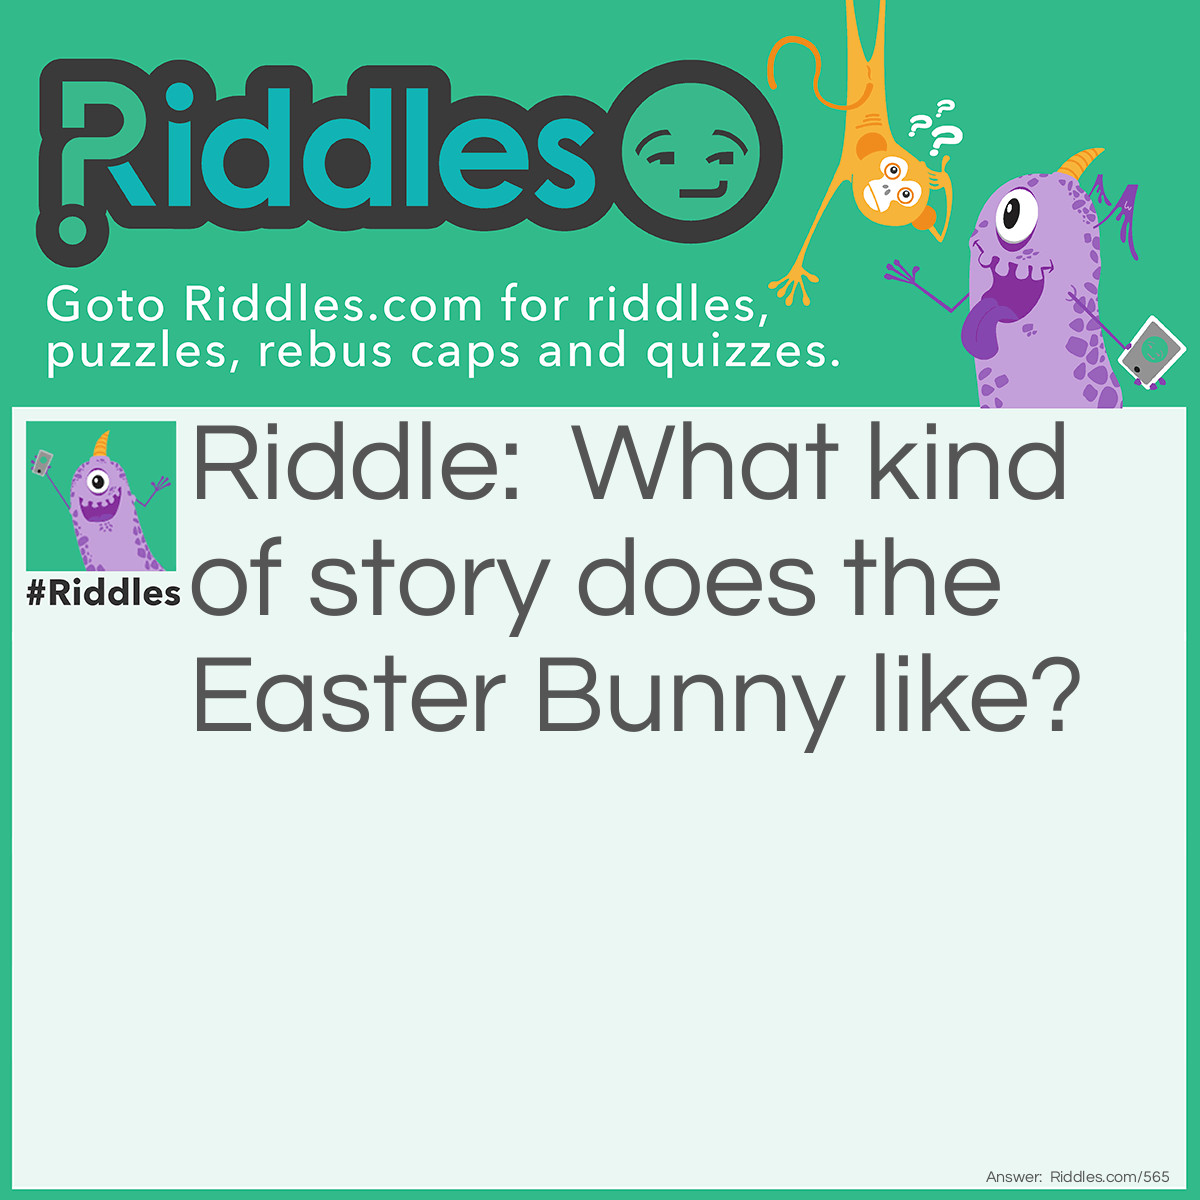 Riddle: What kind of story does the Easter Bunny like? Answer: One's with hoppy endings!